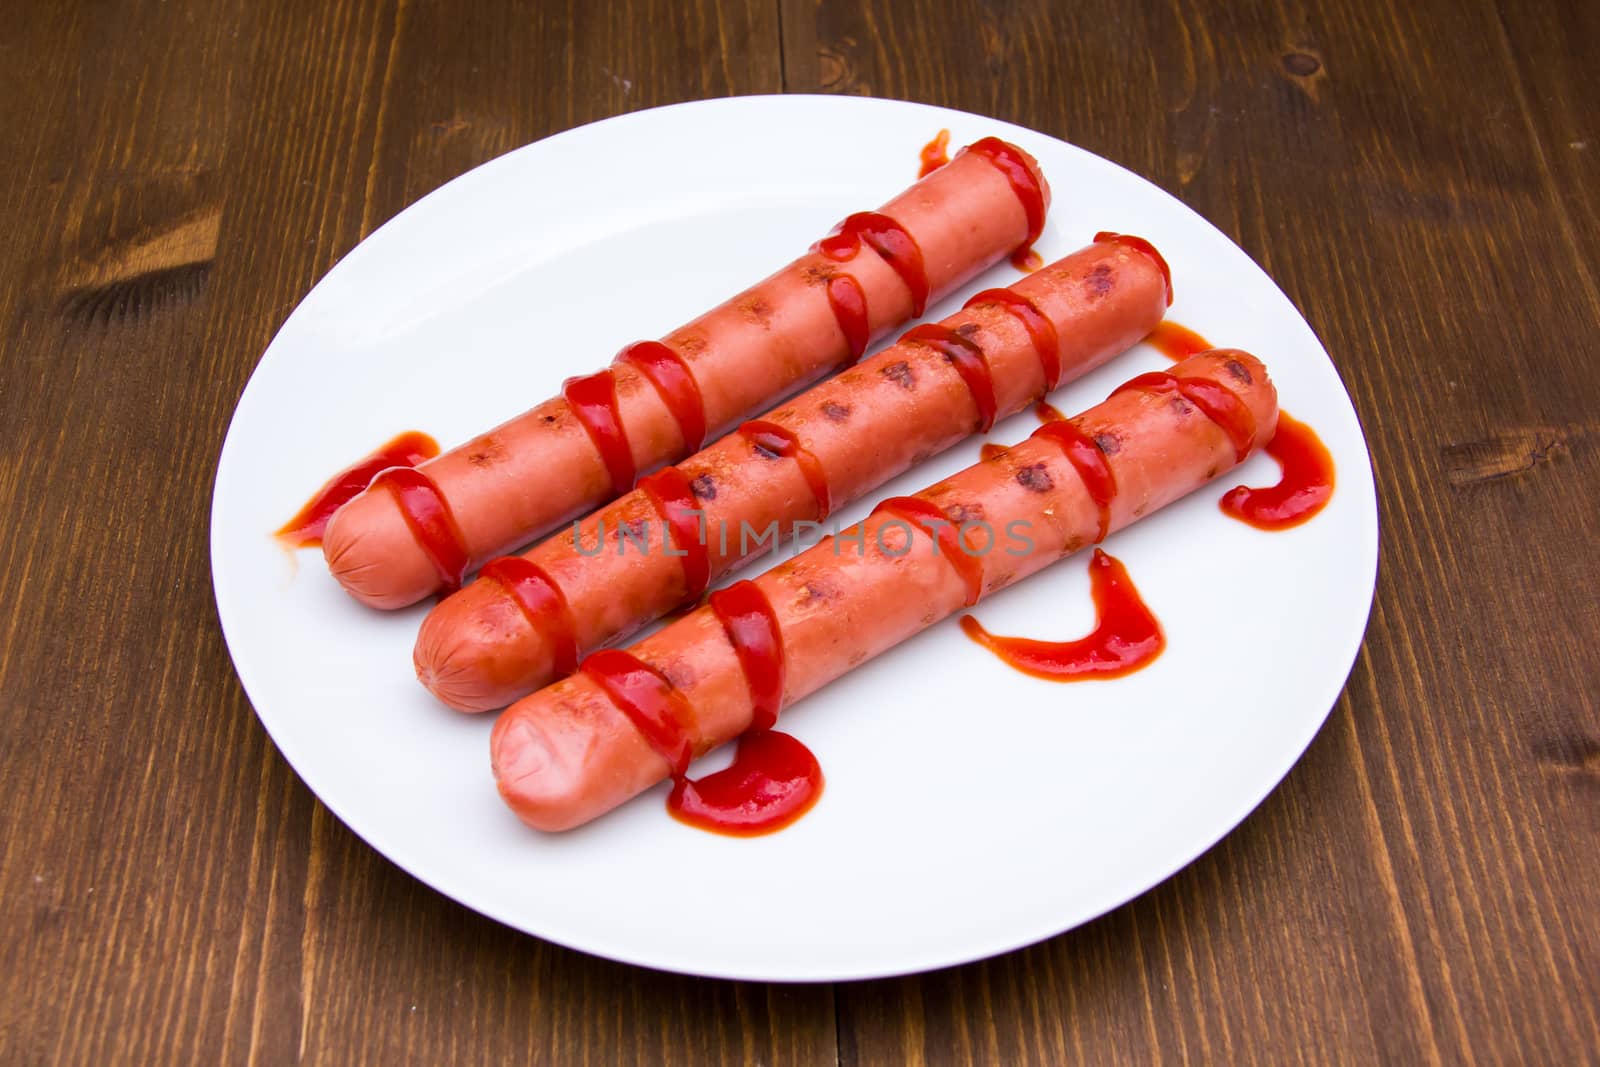 Sausages with tomato sauce on wooden table